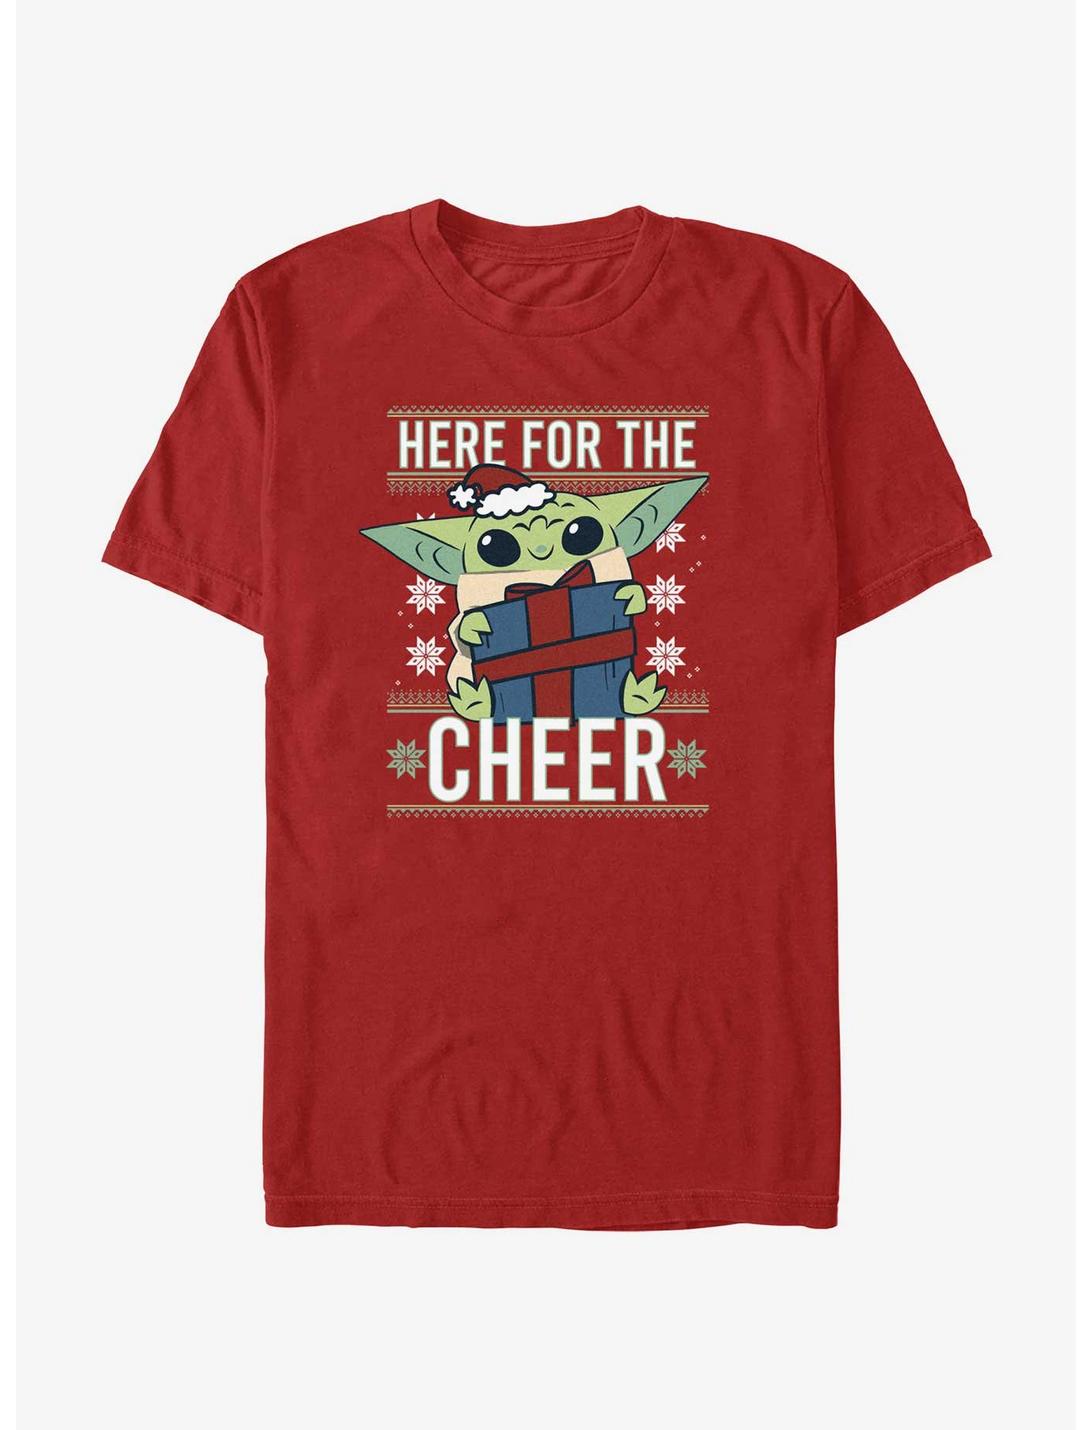 Star Wars The Mandalorian Grogu Here For The Cheer T-Shirt, RED, hi-res